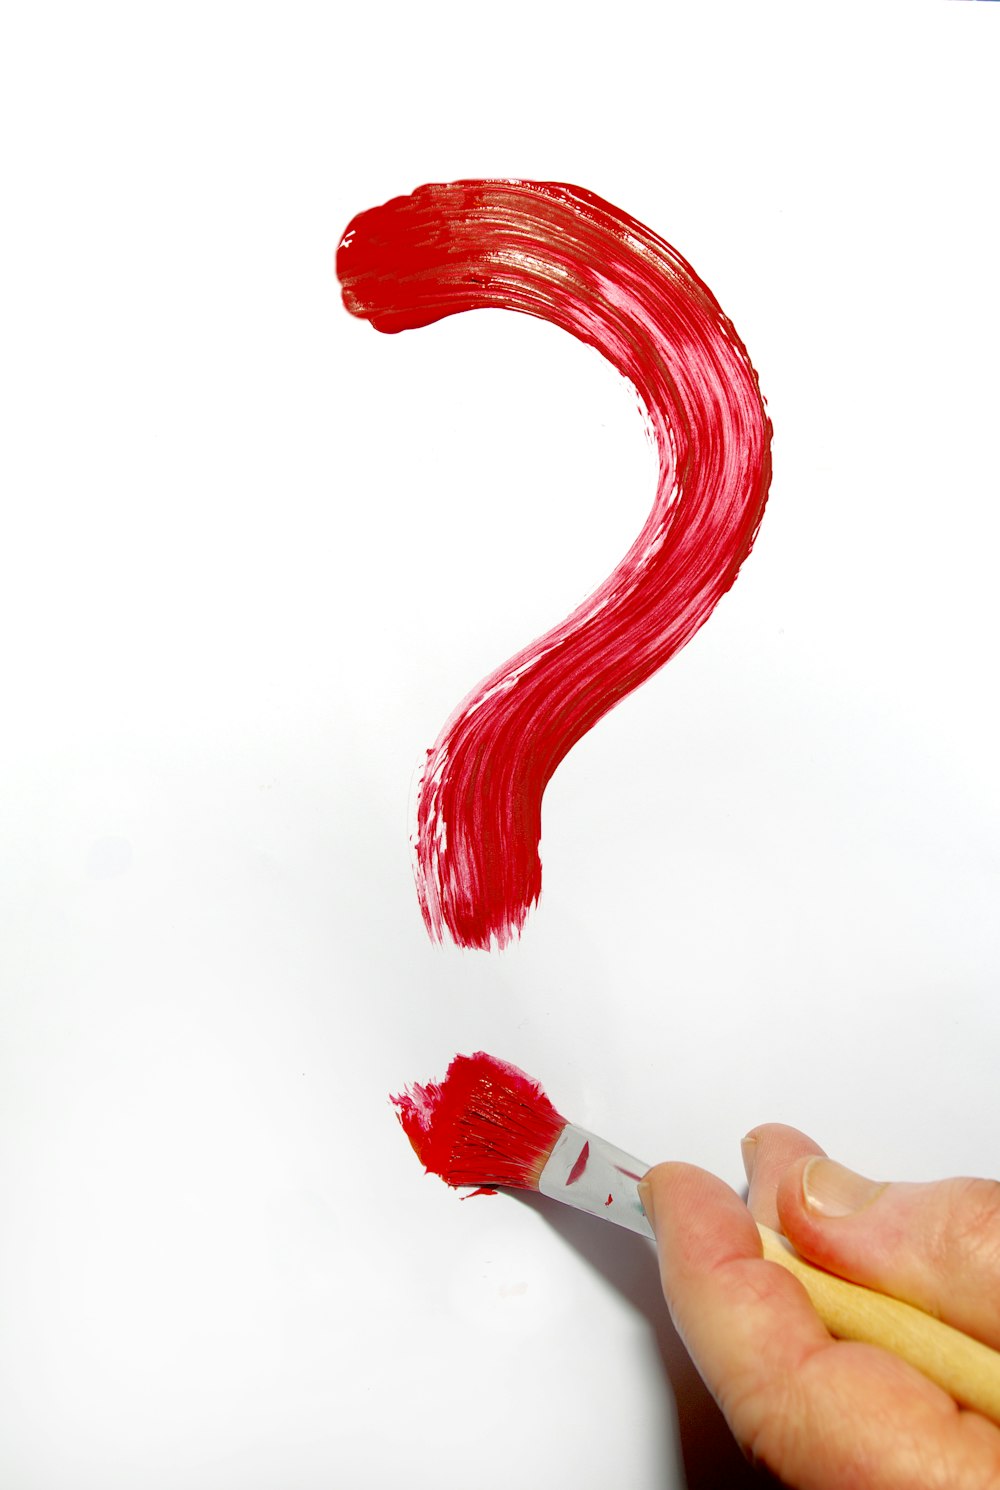 a hand holding a paintbrush and a red question mark